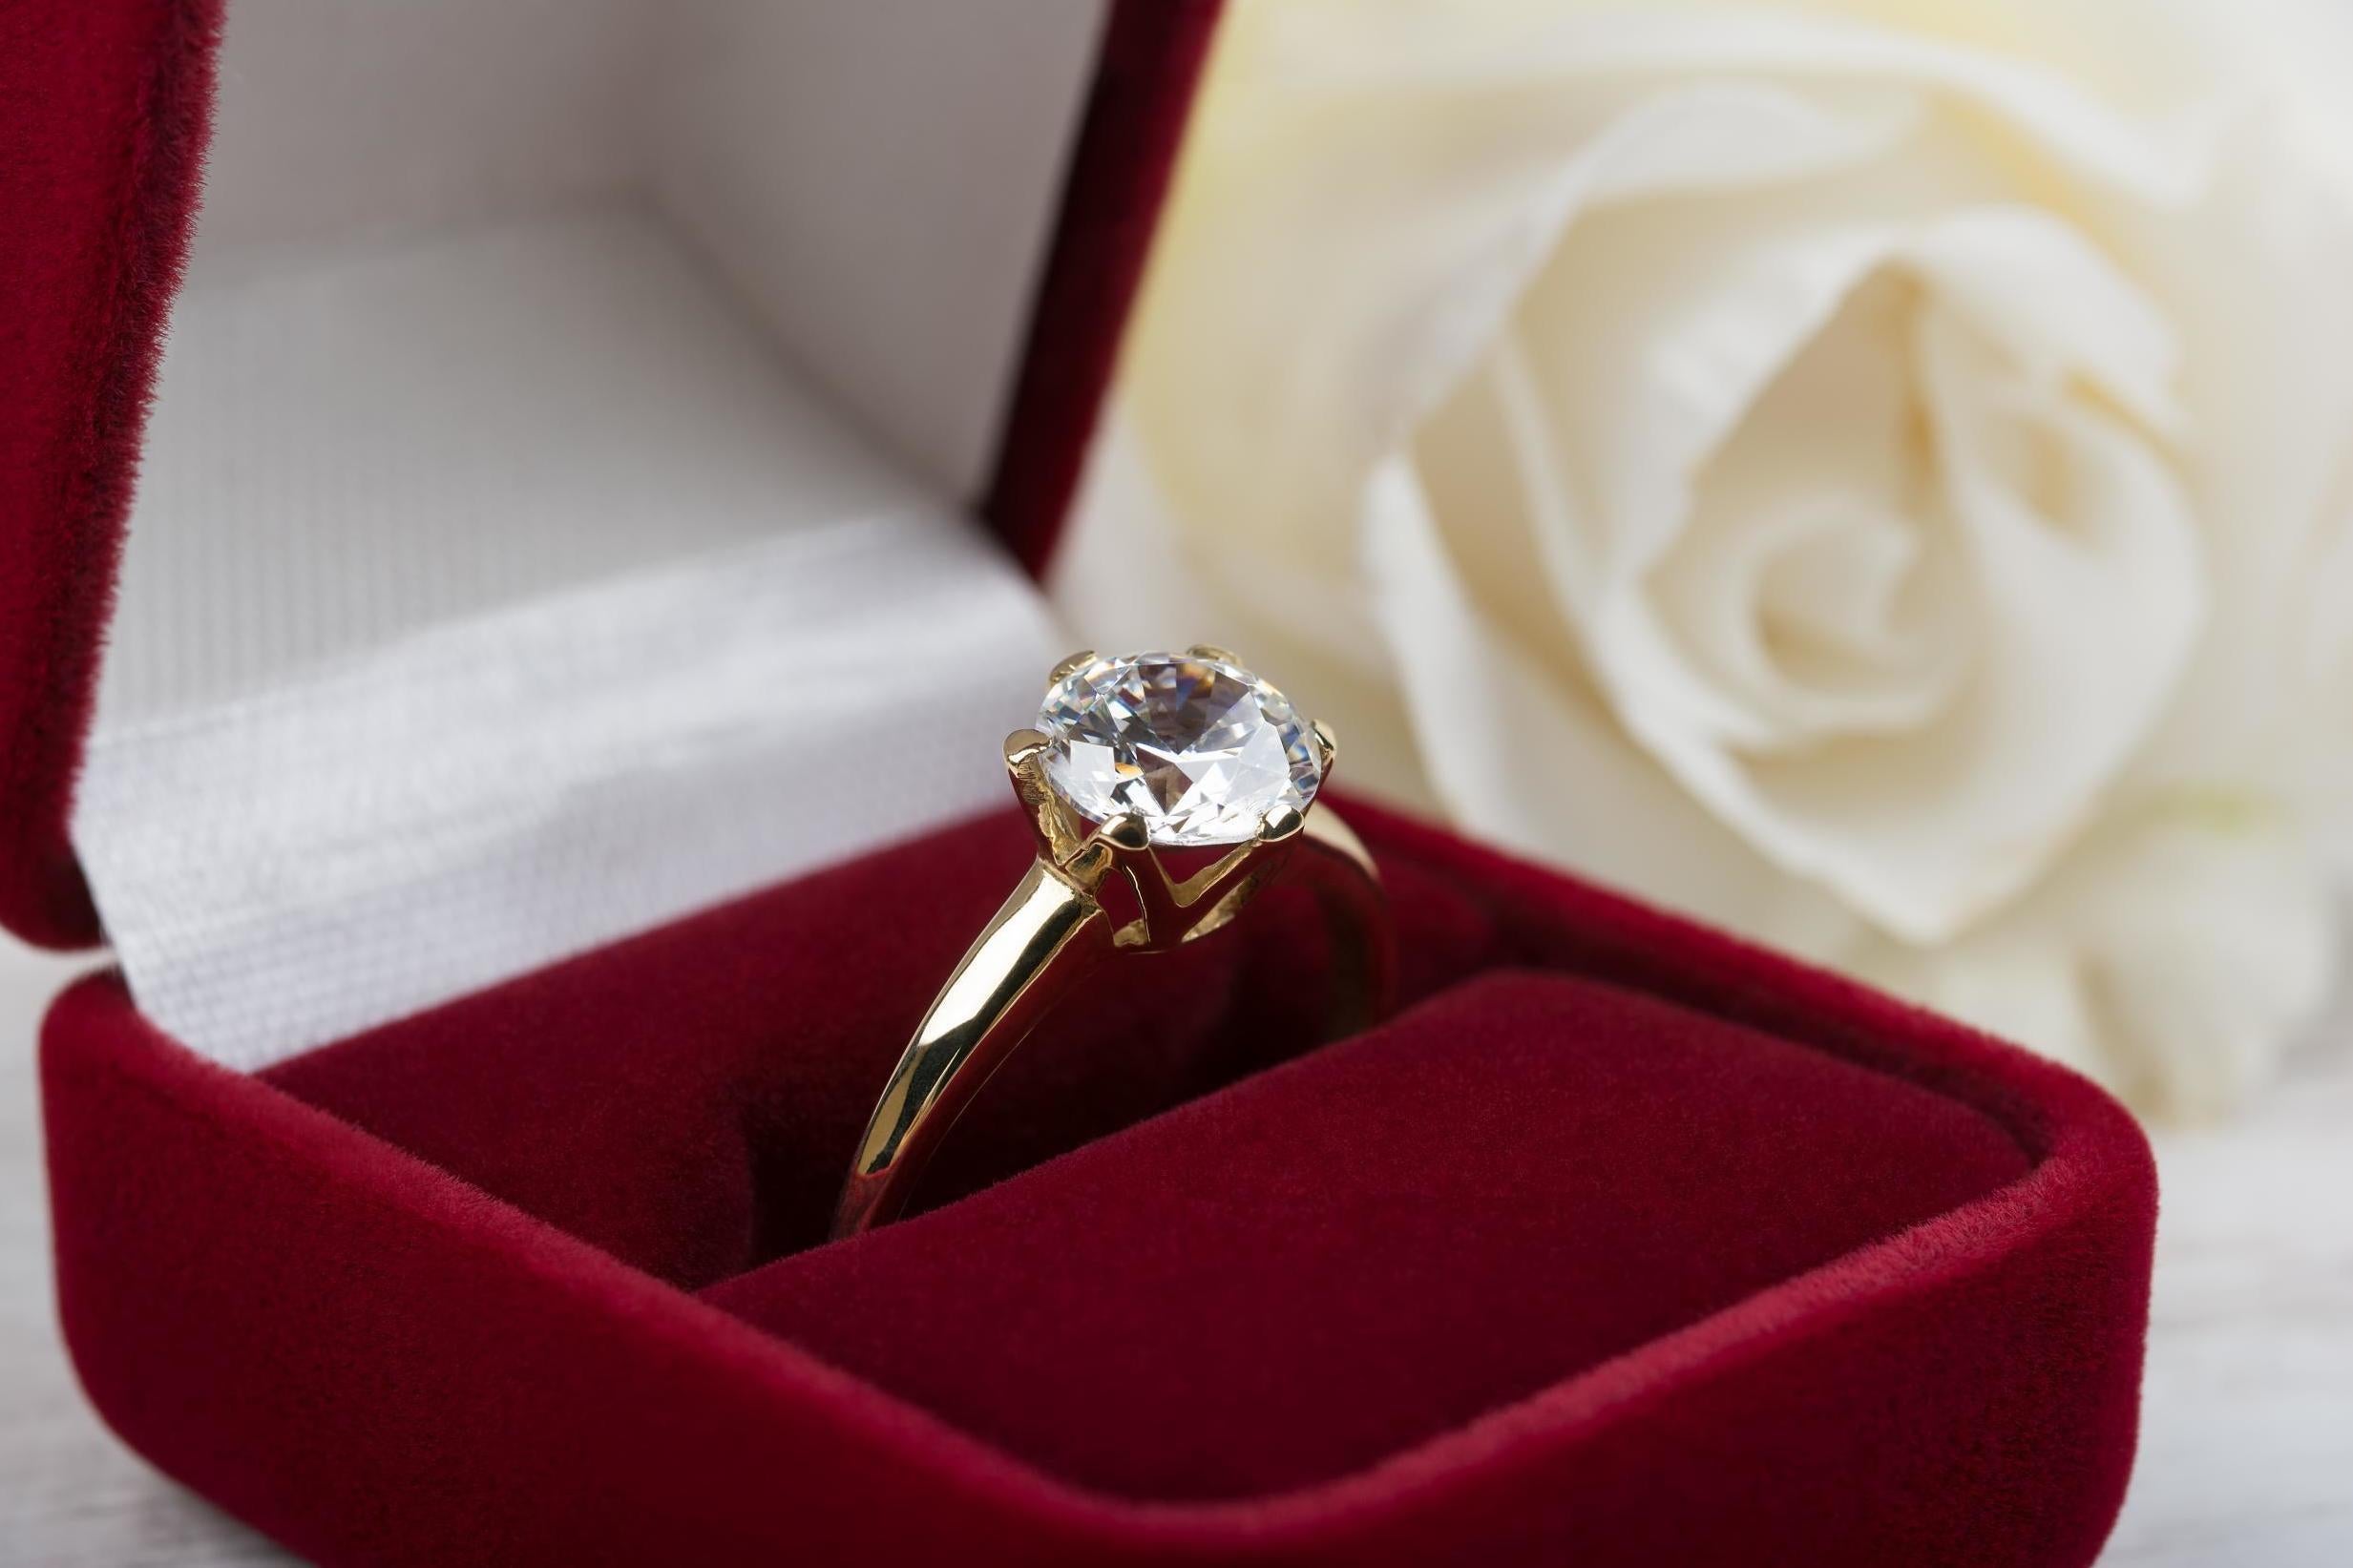 Zara Engagement Ring - Solitaire Diamond Rings at Best Prices in India |  SarvadaJewels.com